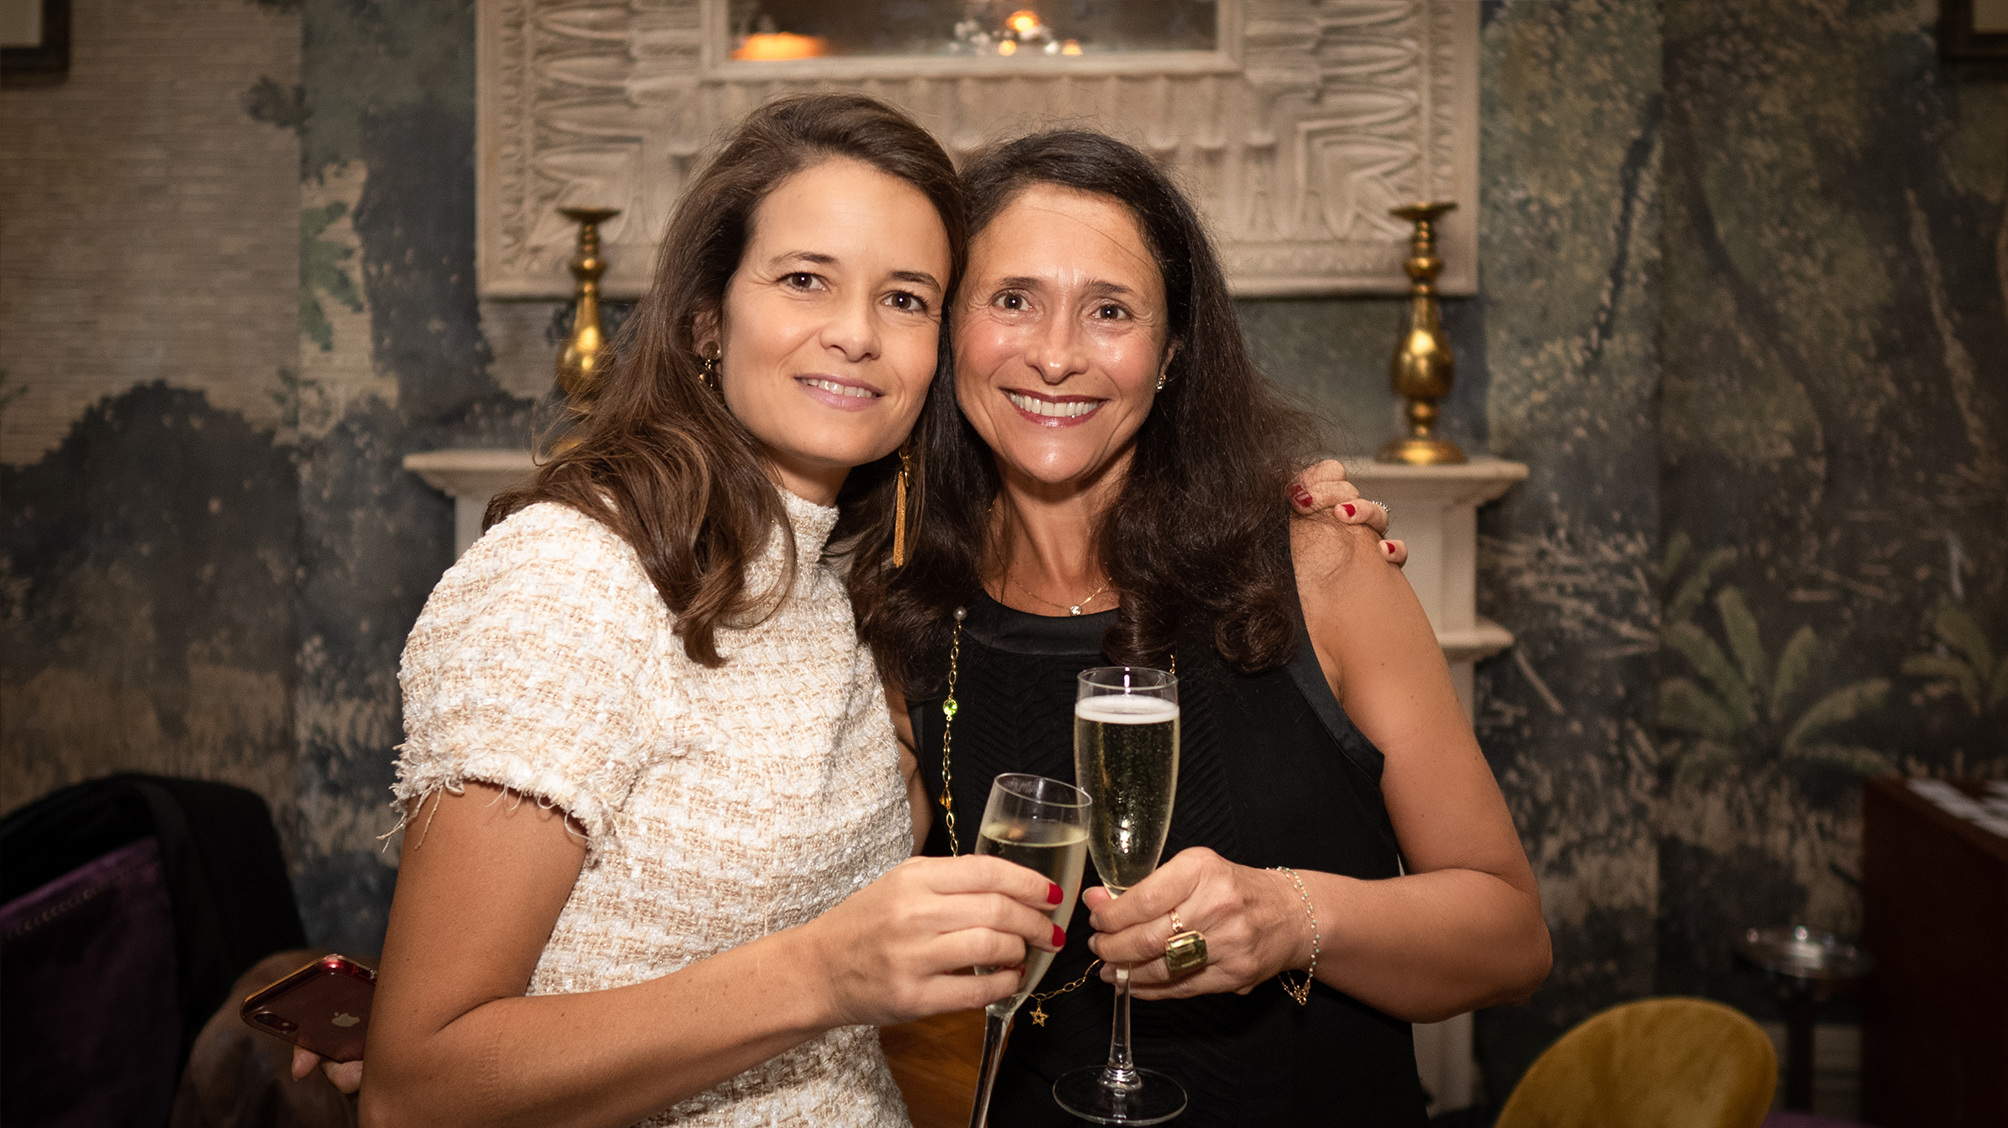 Visual aid: Two women posing at an event in a posh venue in London